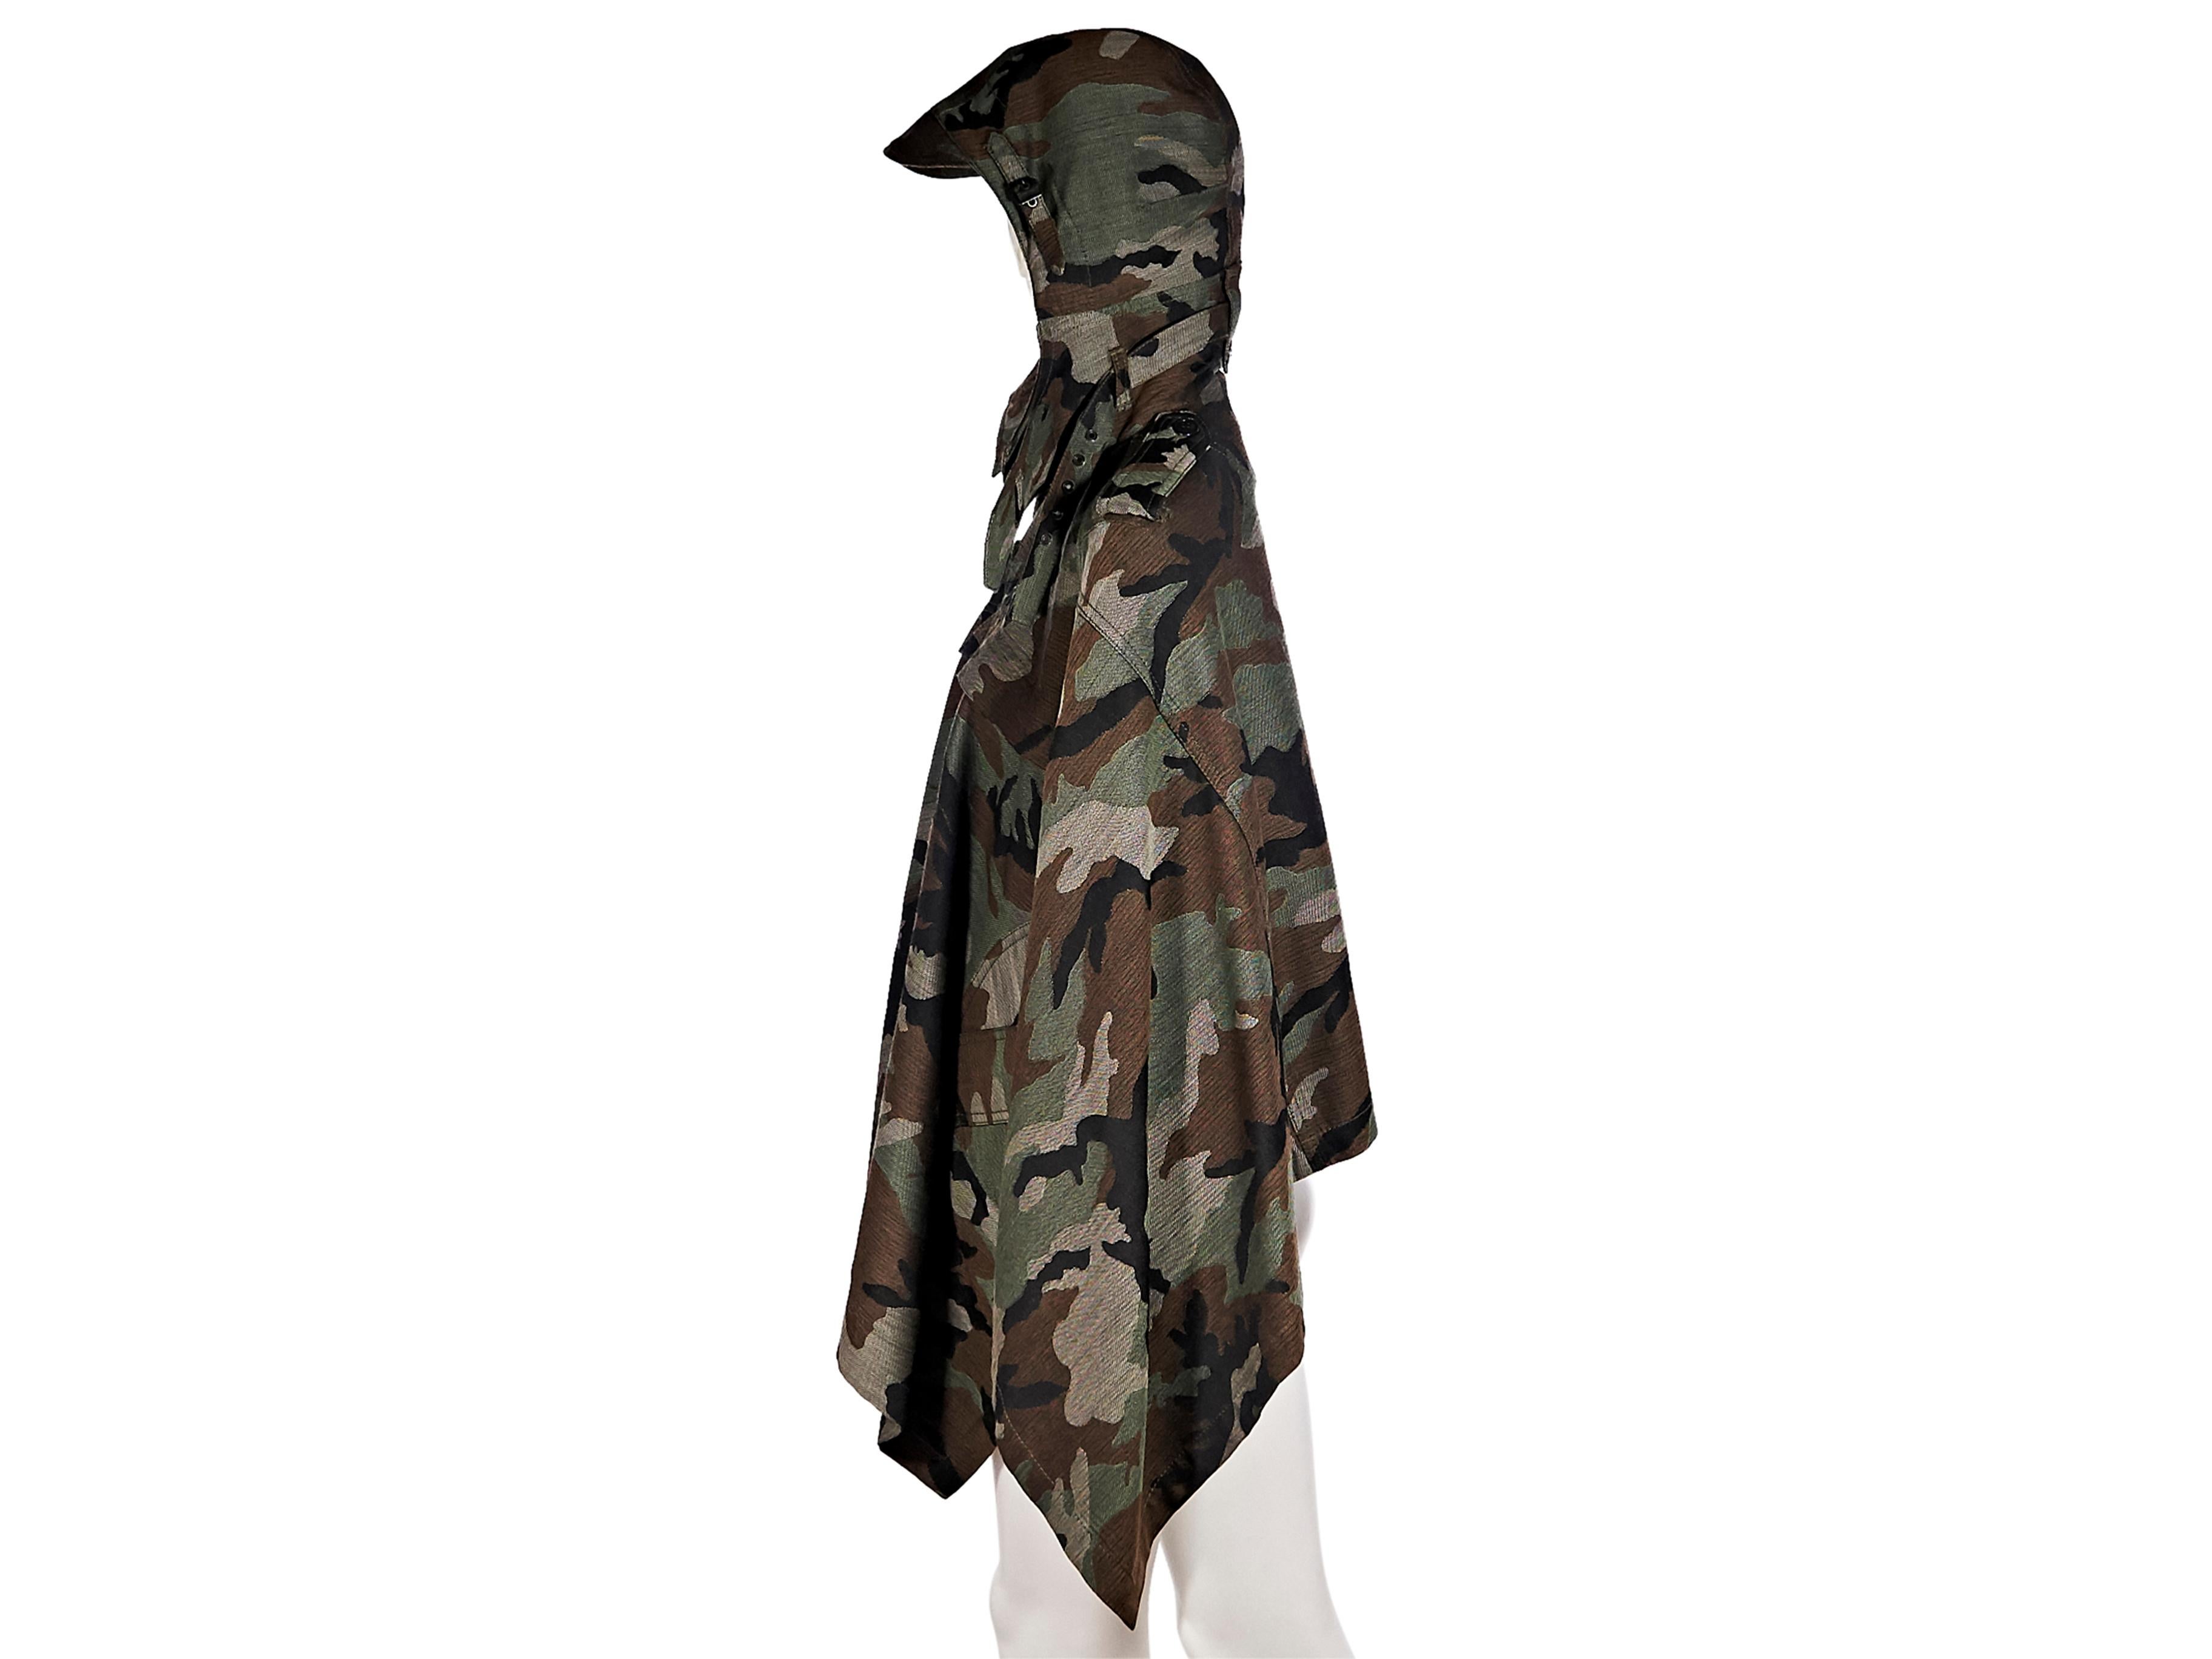 Product details:  Multicolor camo wool poncho by Junya Watanabe Comme des Garcon.  From the FW 2010 collection.  Hood with adjustable buckle closure.  Spread collar.  Shoulder epaulettes.  Long sleeves.  Waist button flap pockets.  34